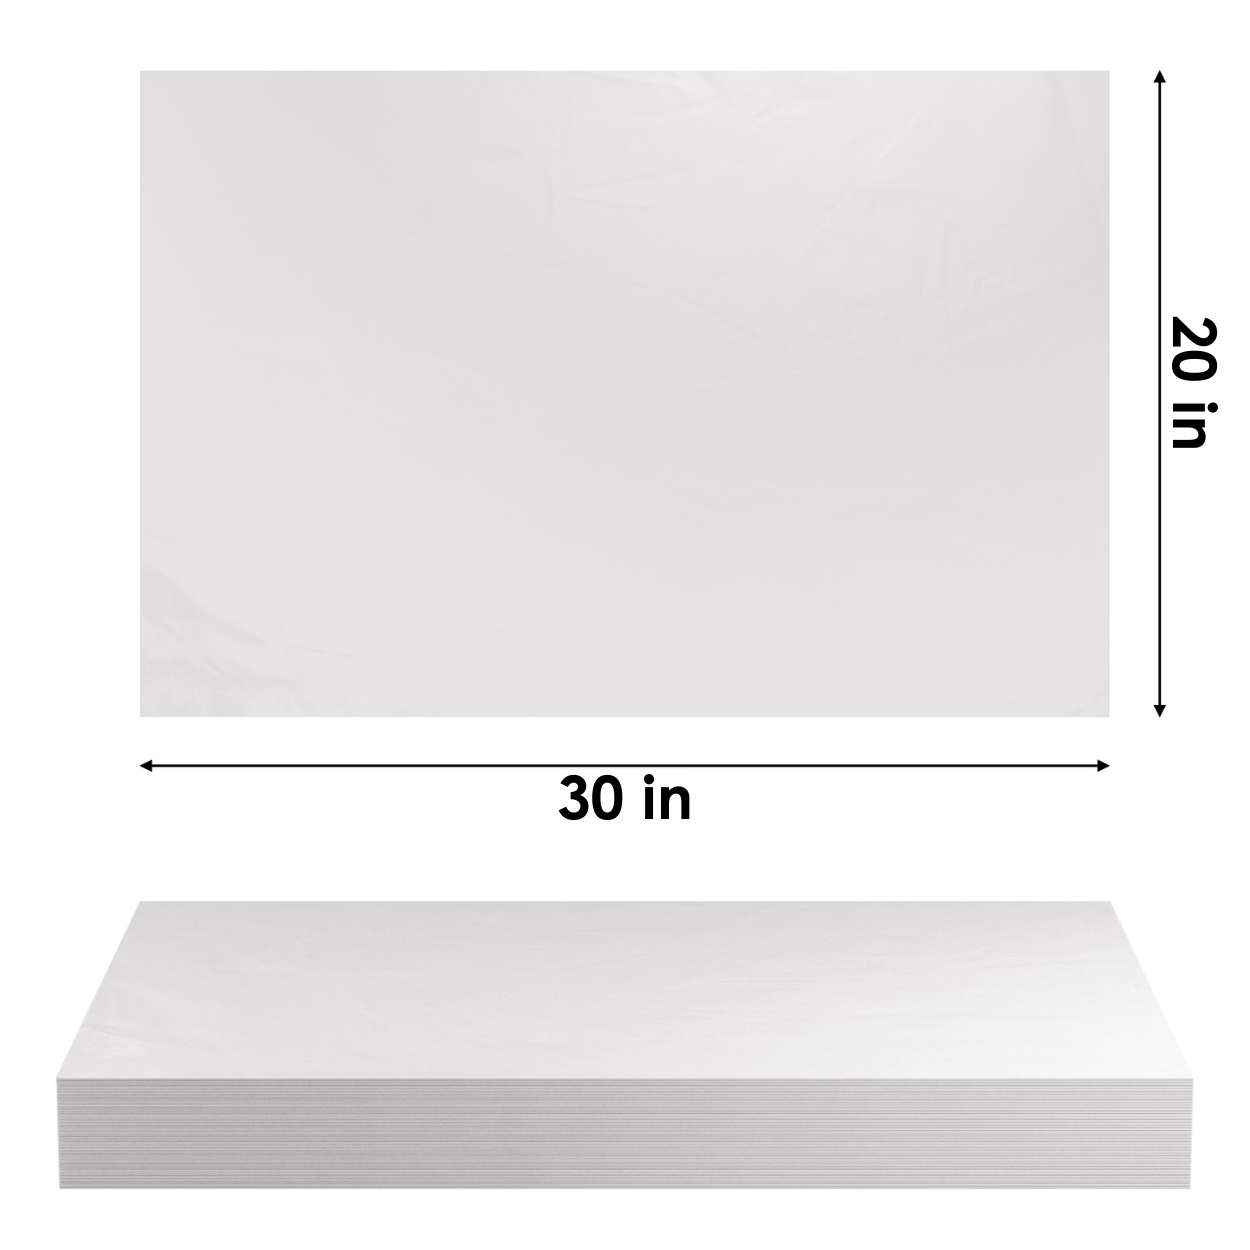 960 Sheets of 20 x 30 White Tissue Reams - Versatile Craft, Packing, and  Gift Wrapping Paper